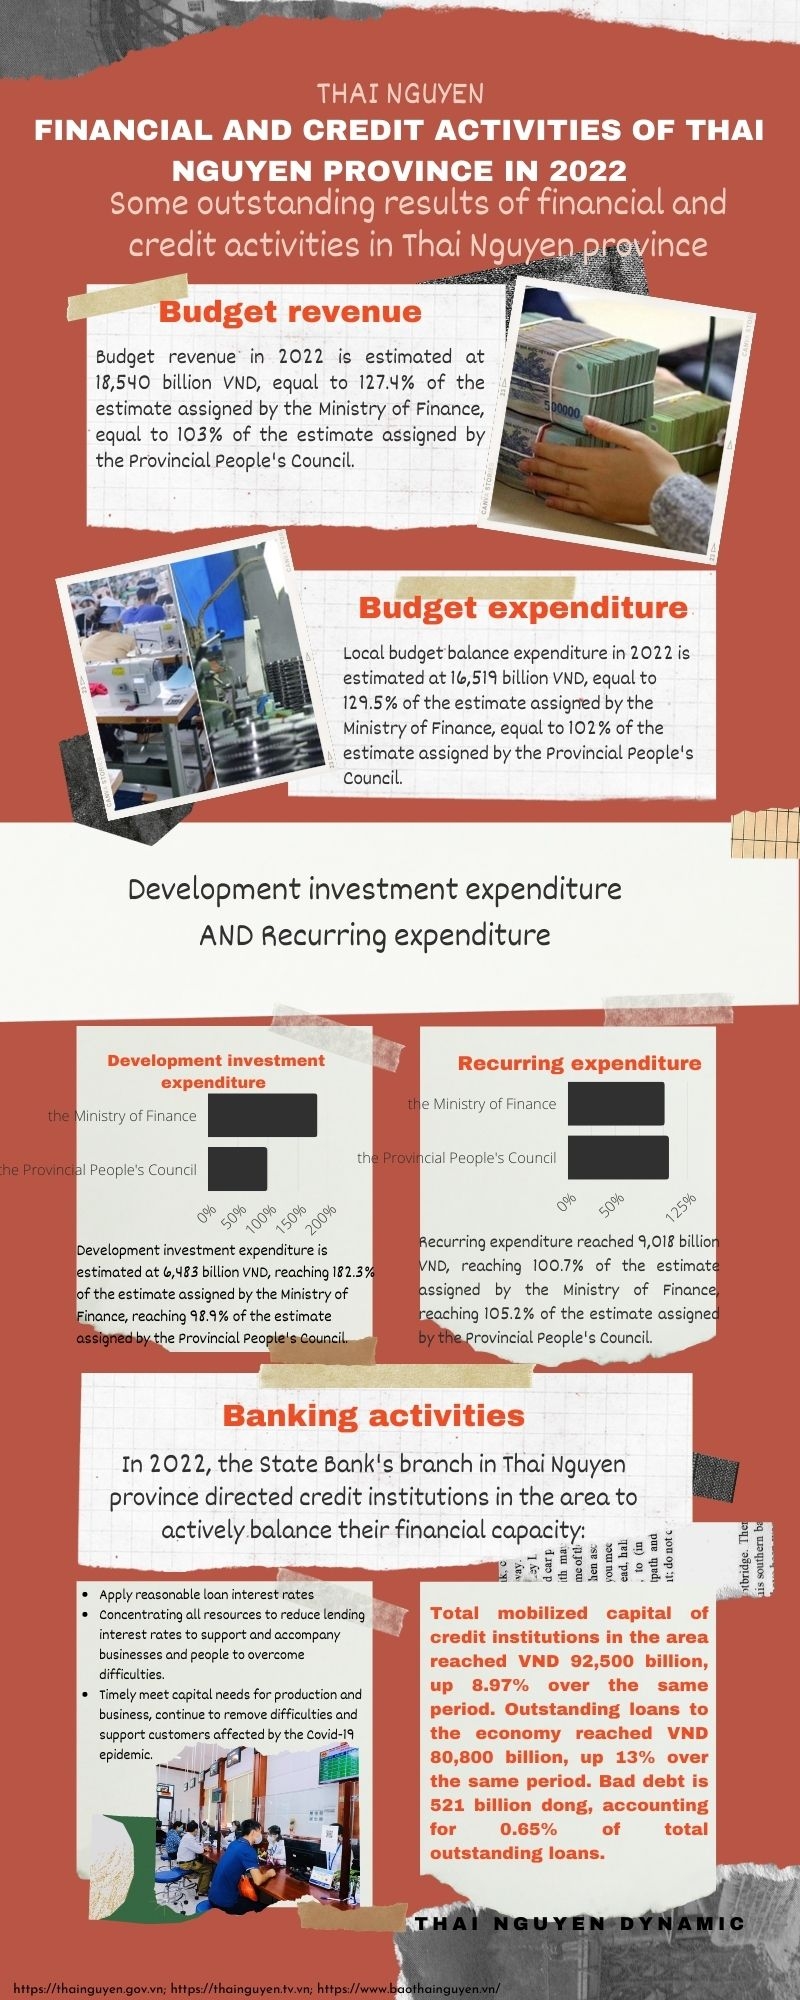 [Infographic] Financial and credit activities of Thai Nguyen province in 2022